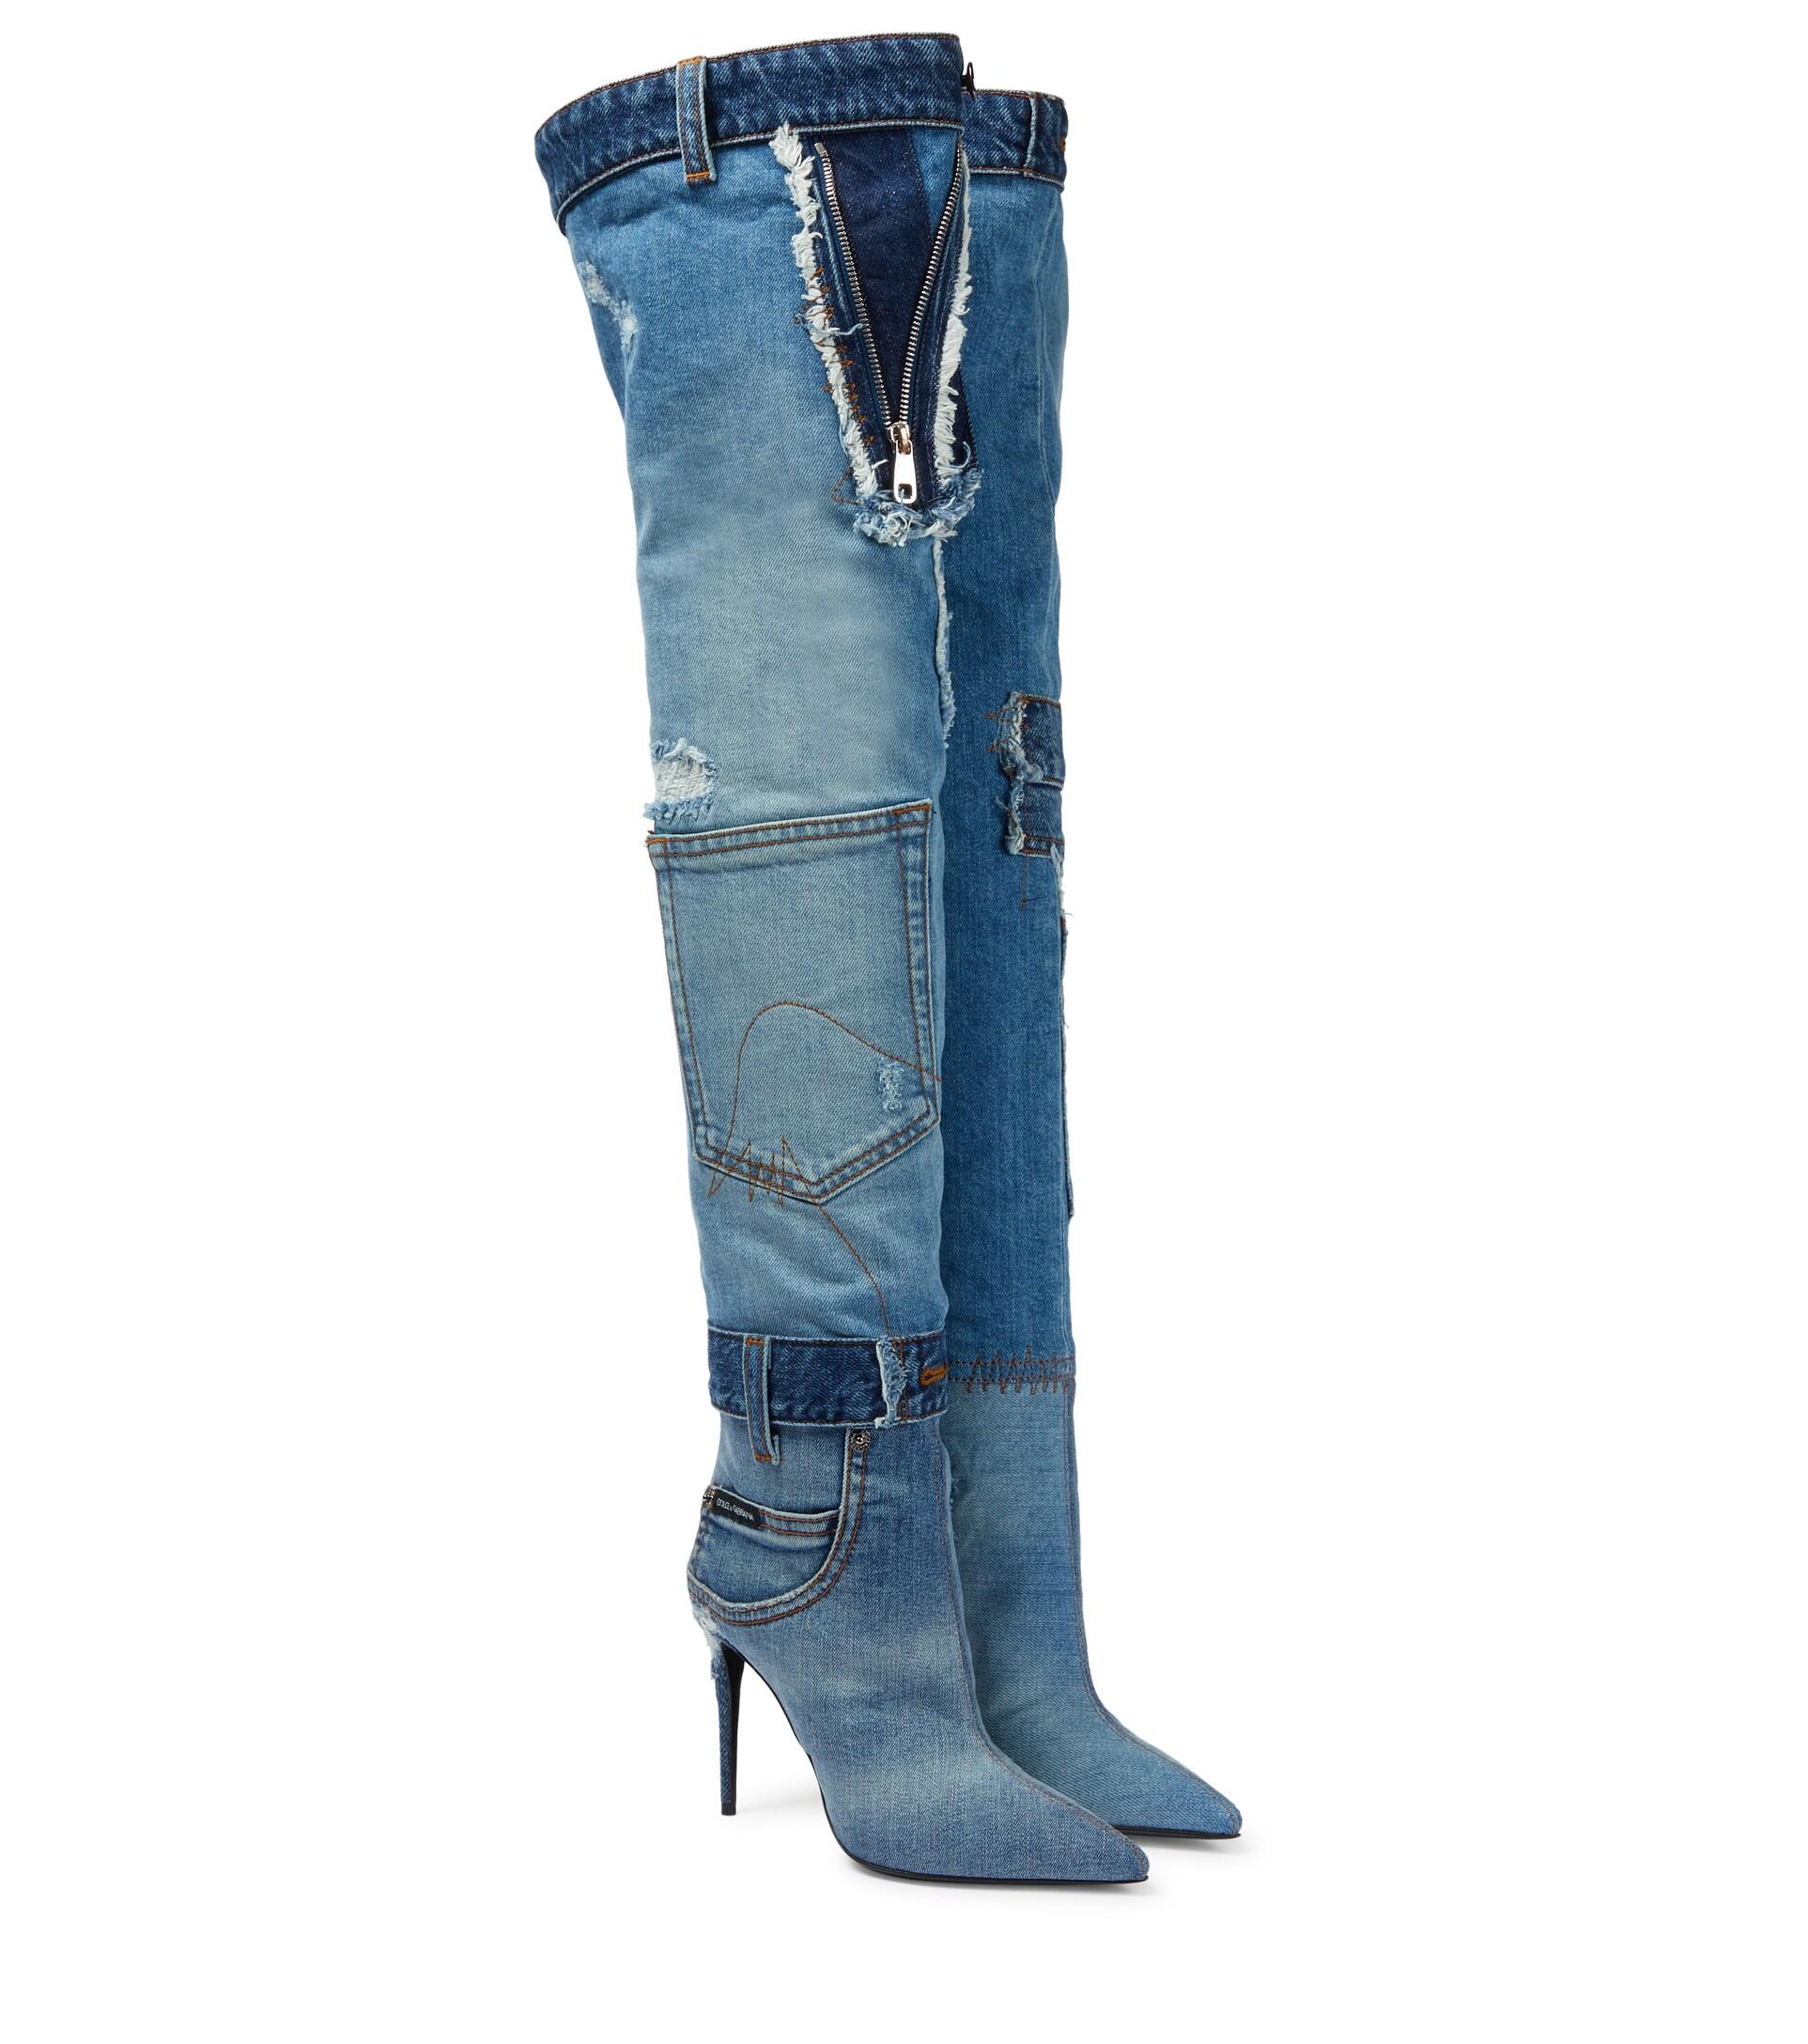 Dolce & Gabbana Cardinale 105 Denim Over-the-knee Boots in Blue | Lyst